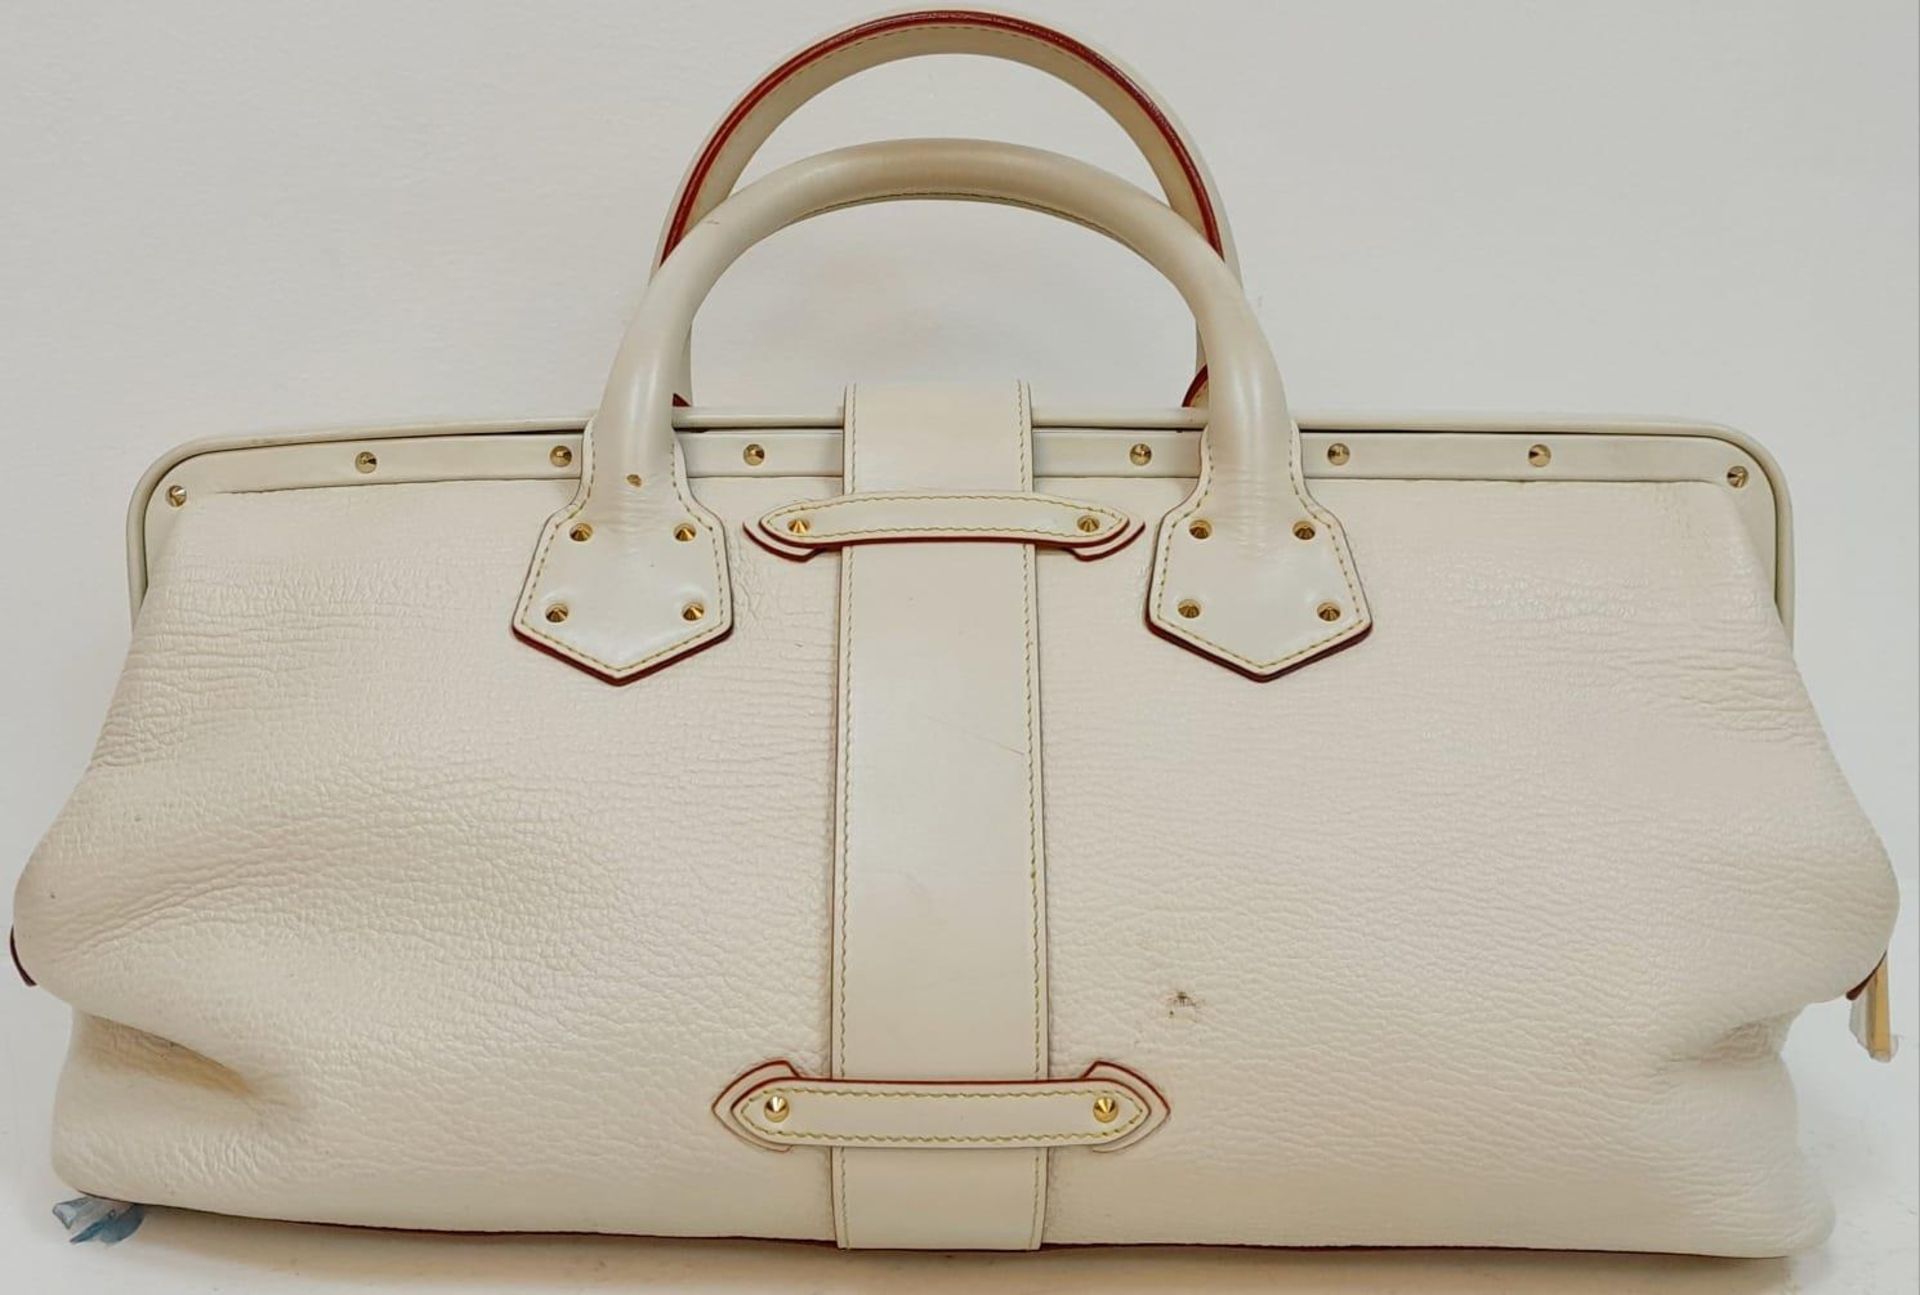 A Louis Vuitton Manhattan PM Suhali Leather Handbag. Soft white textured leather exterior with - Image 2 of 8